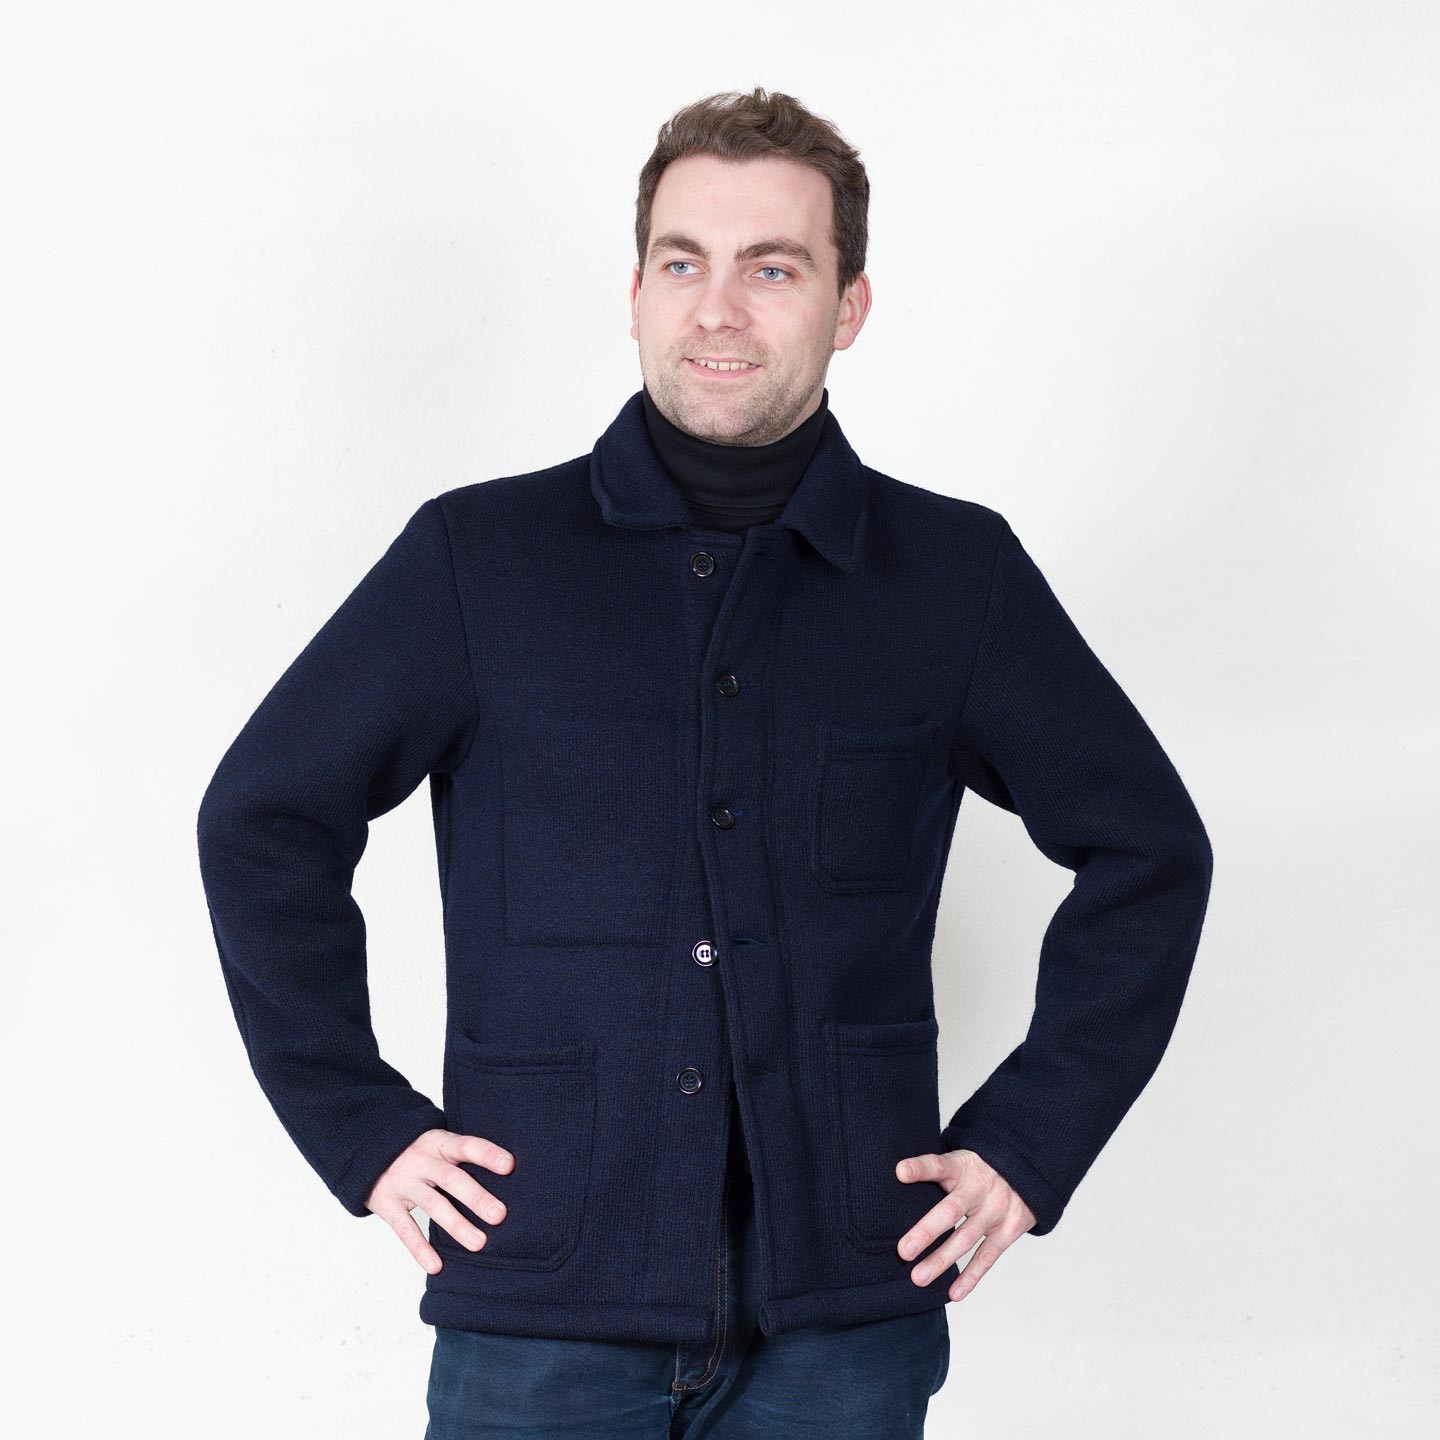 Men's coat - VETRA : Authentic French workwear 100% Made in France